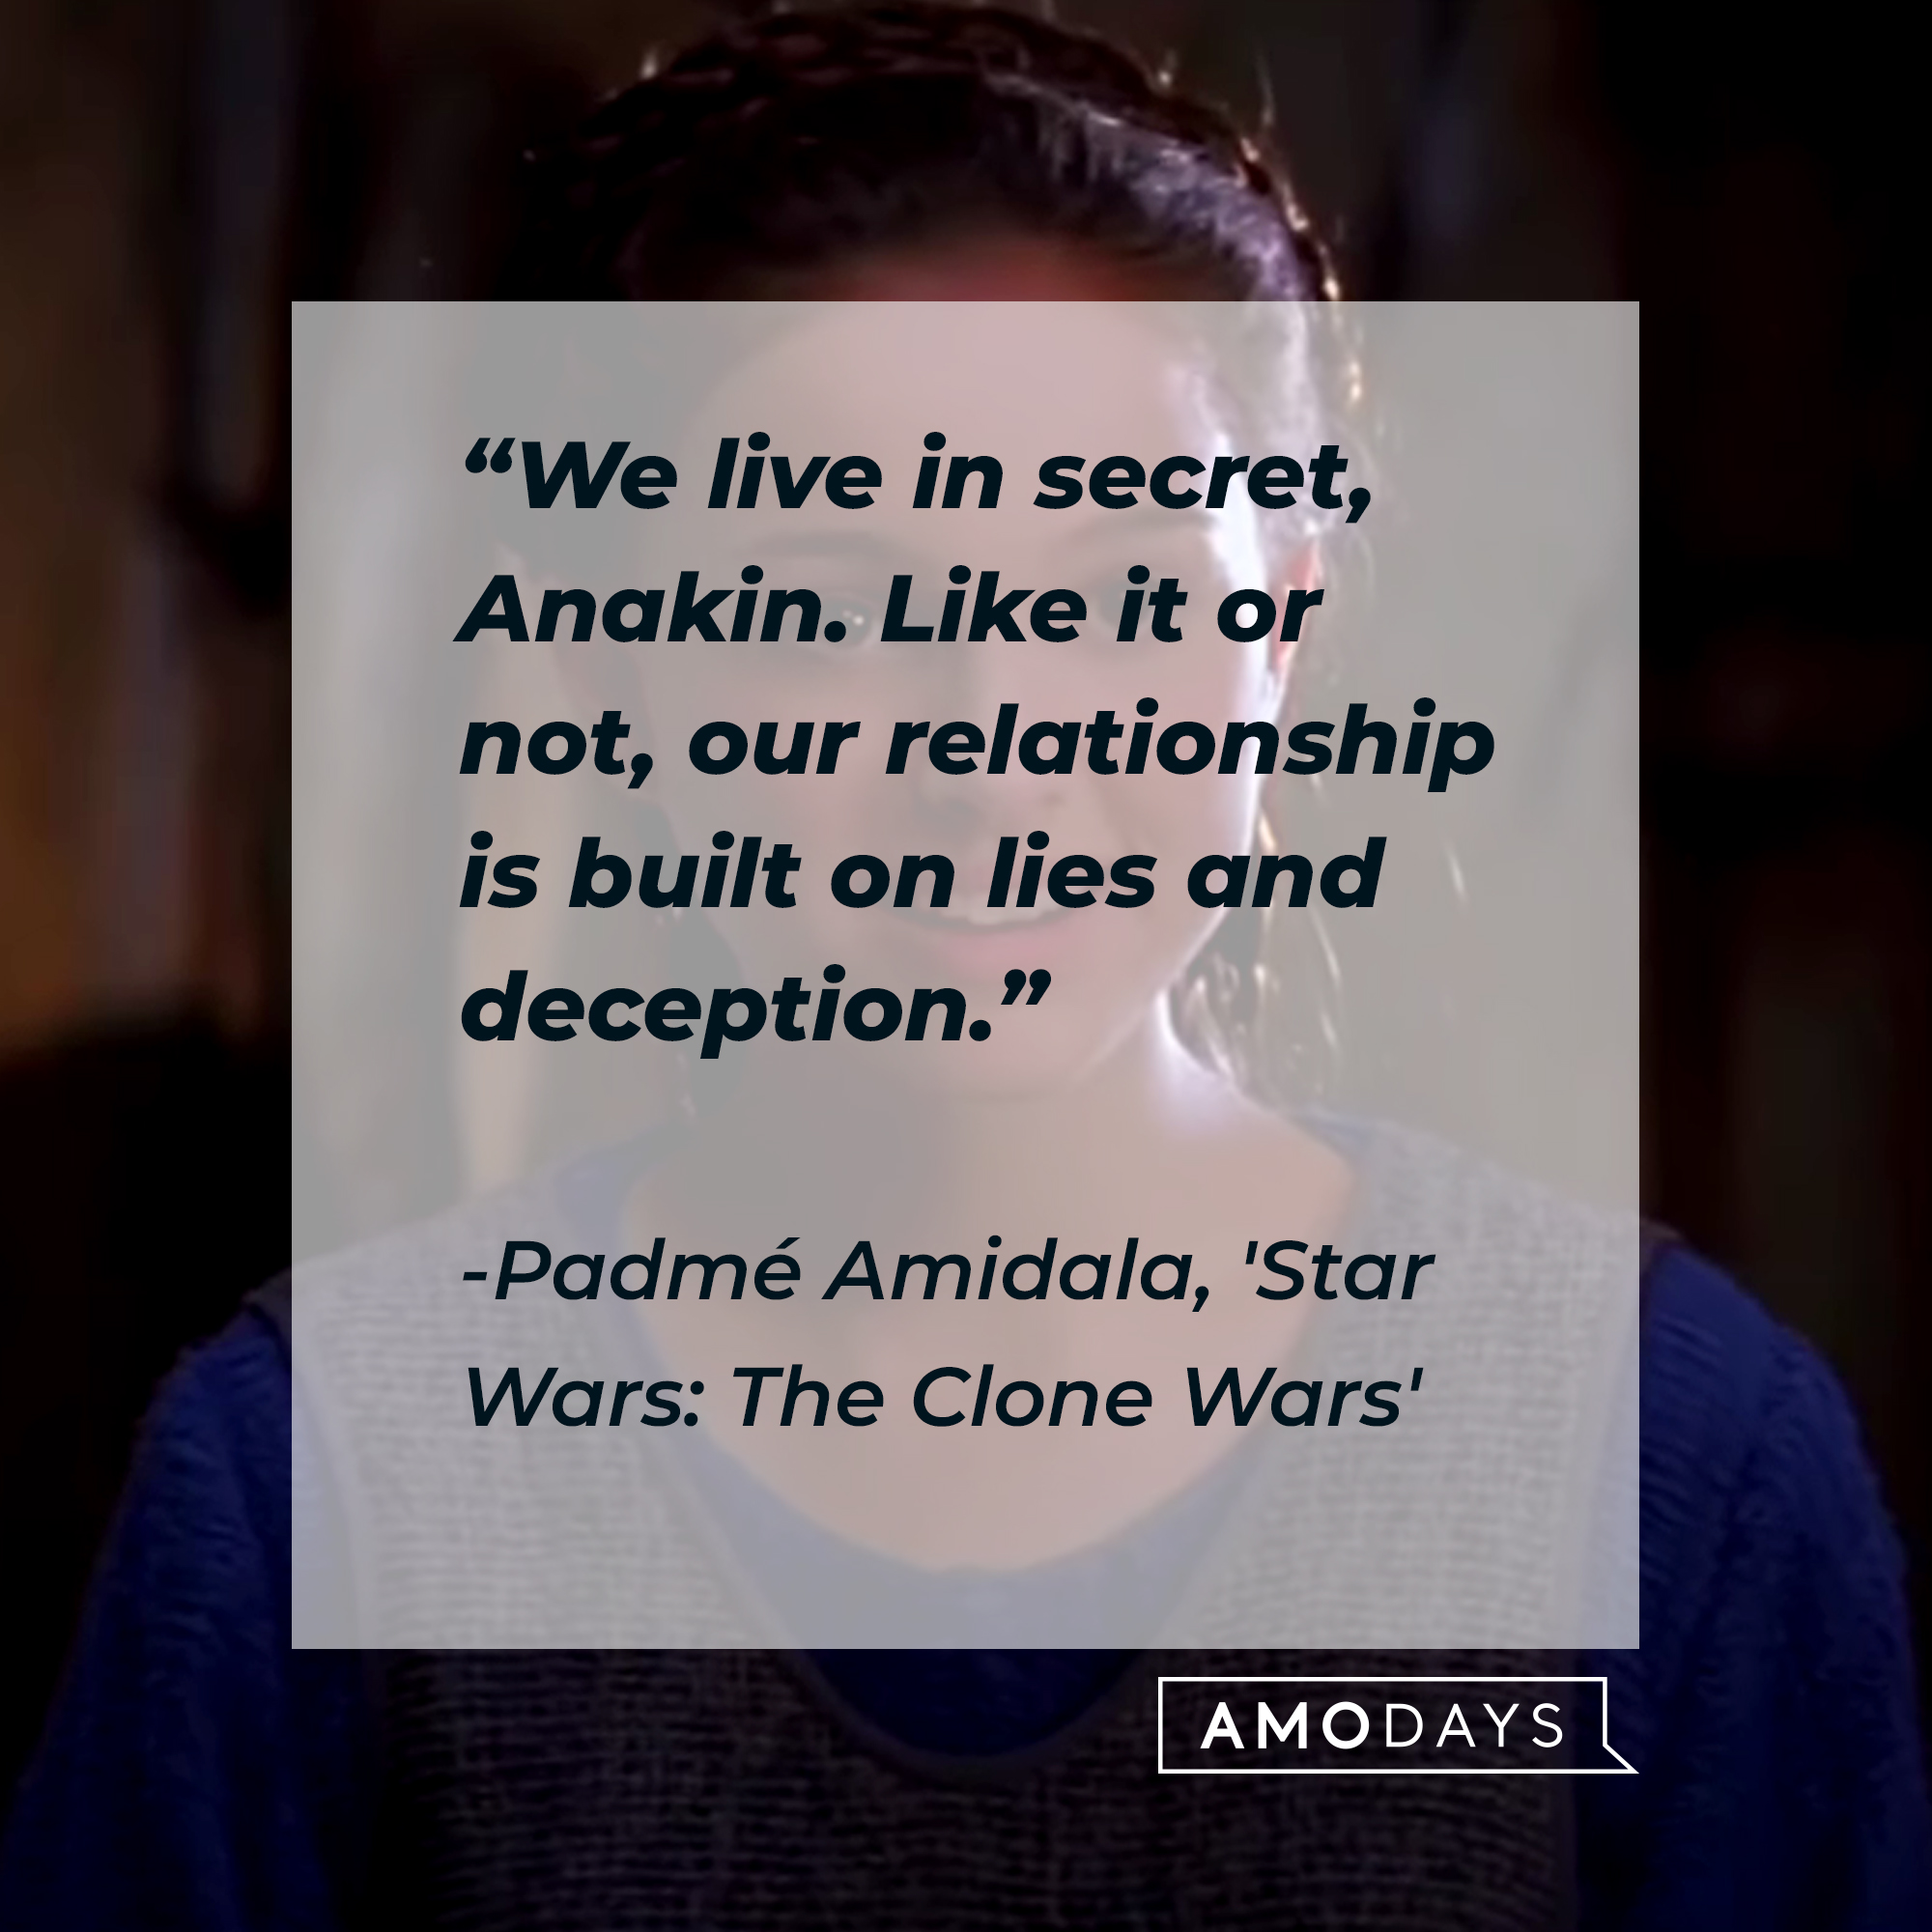 Padmé Amidala with her quote: "We live in secret, Anakin. Like it or not, our relationship is built on lies and deception." | Source: Facebook.com/StarWars